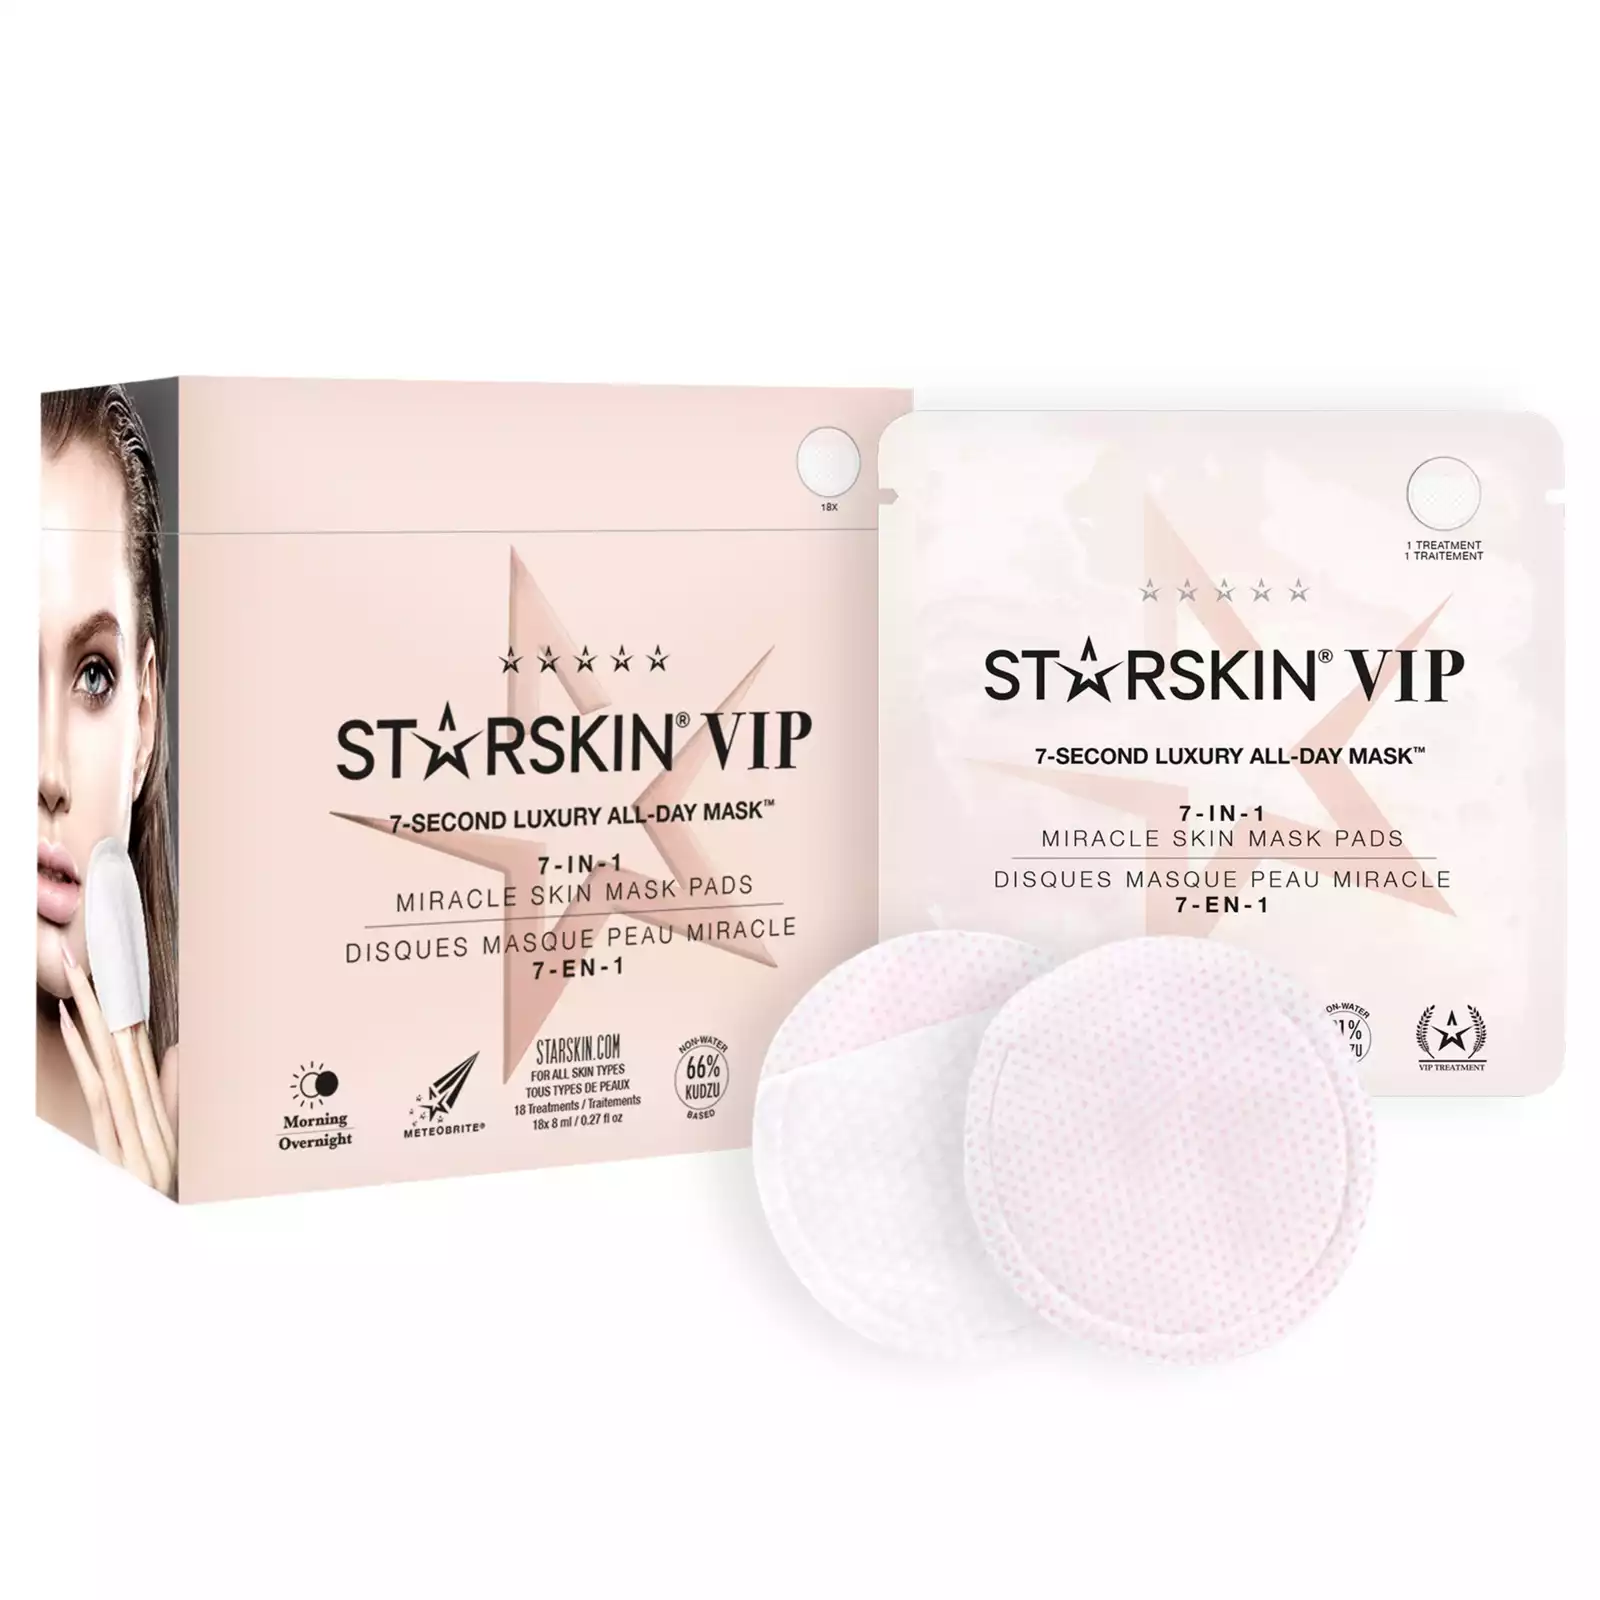 VIP 7-second luxury all-day mask, set 18 mask